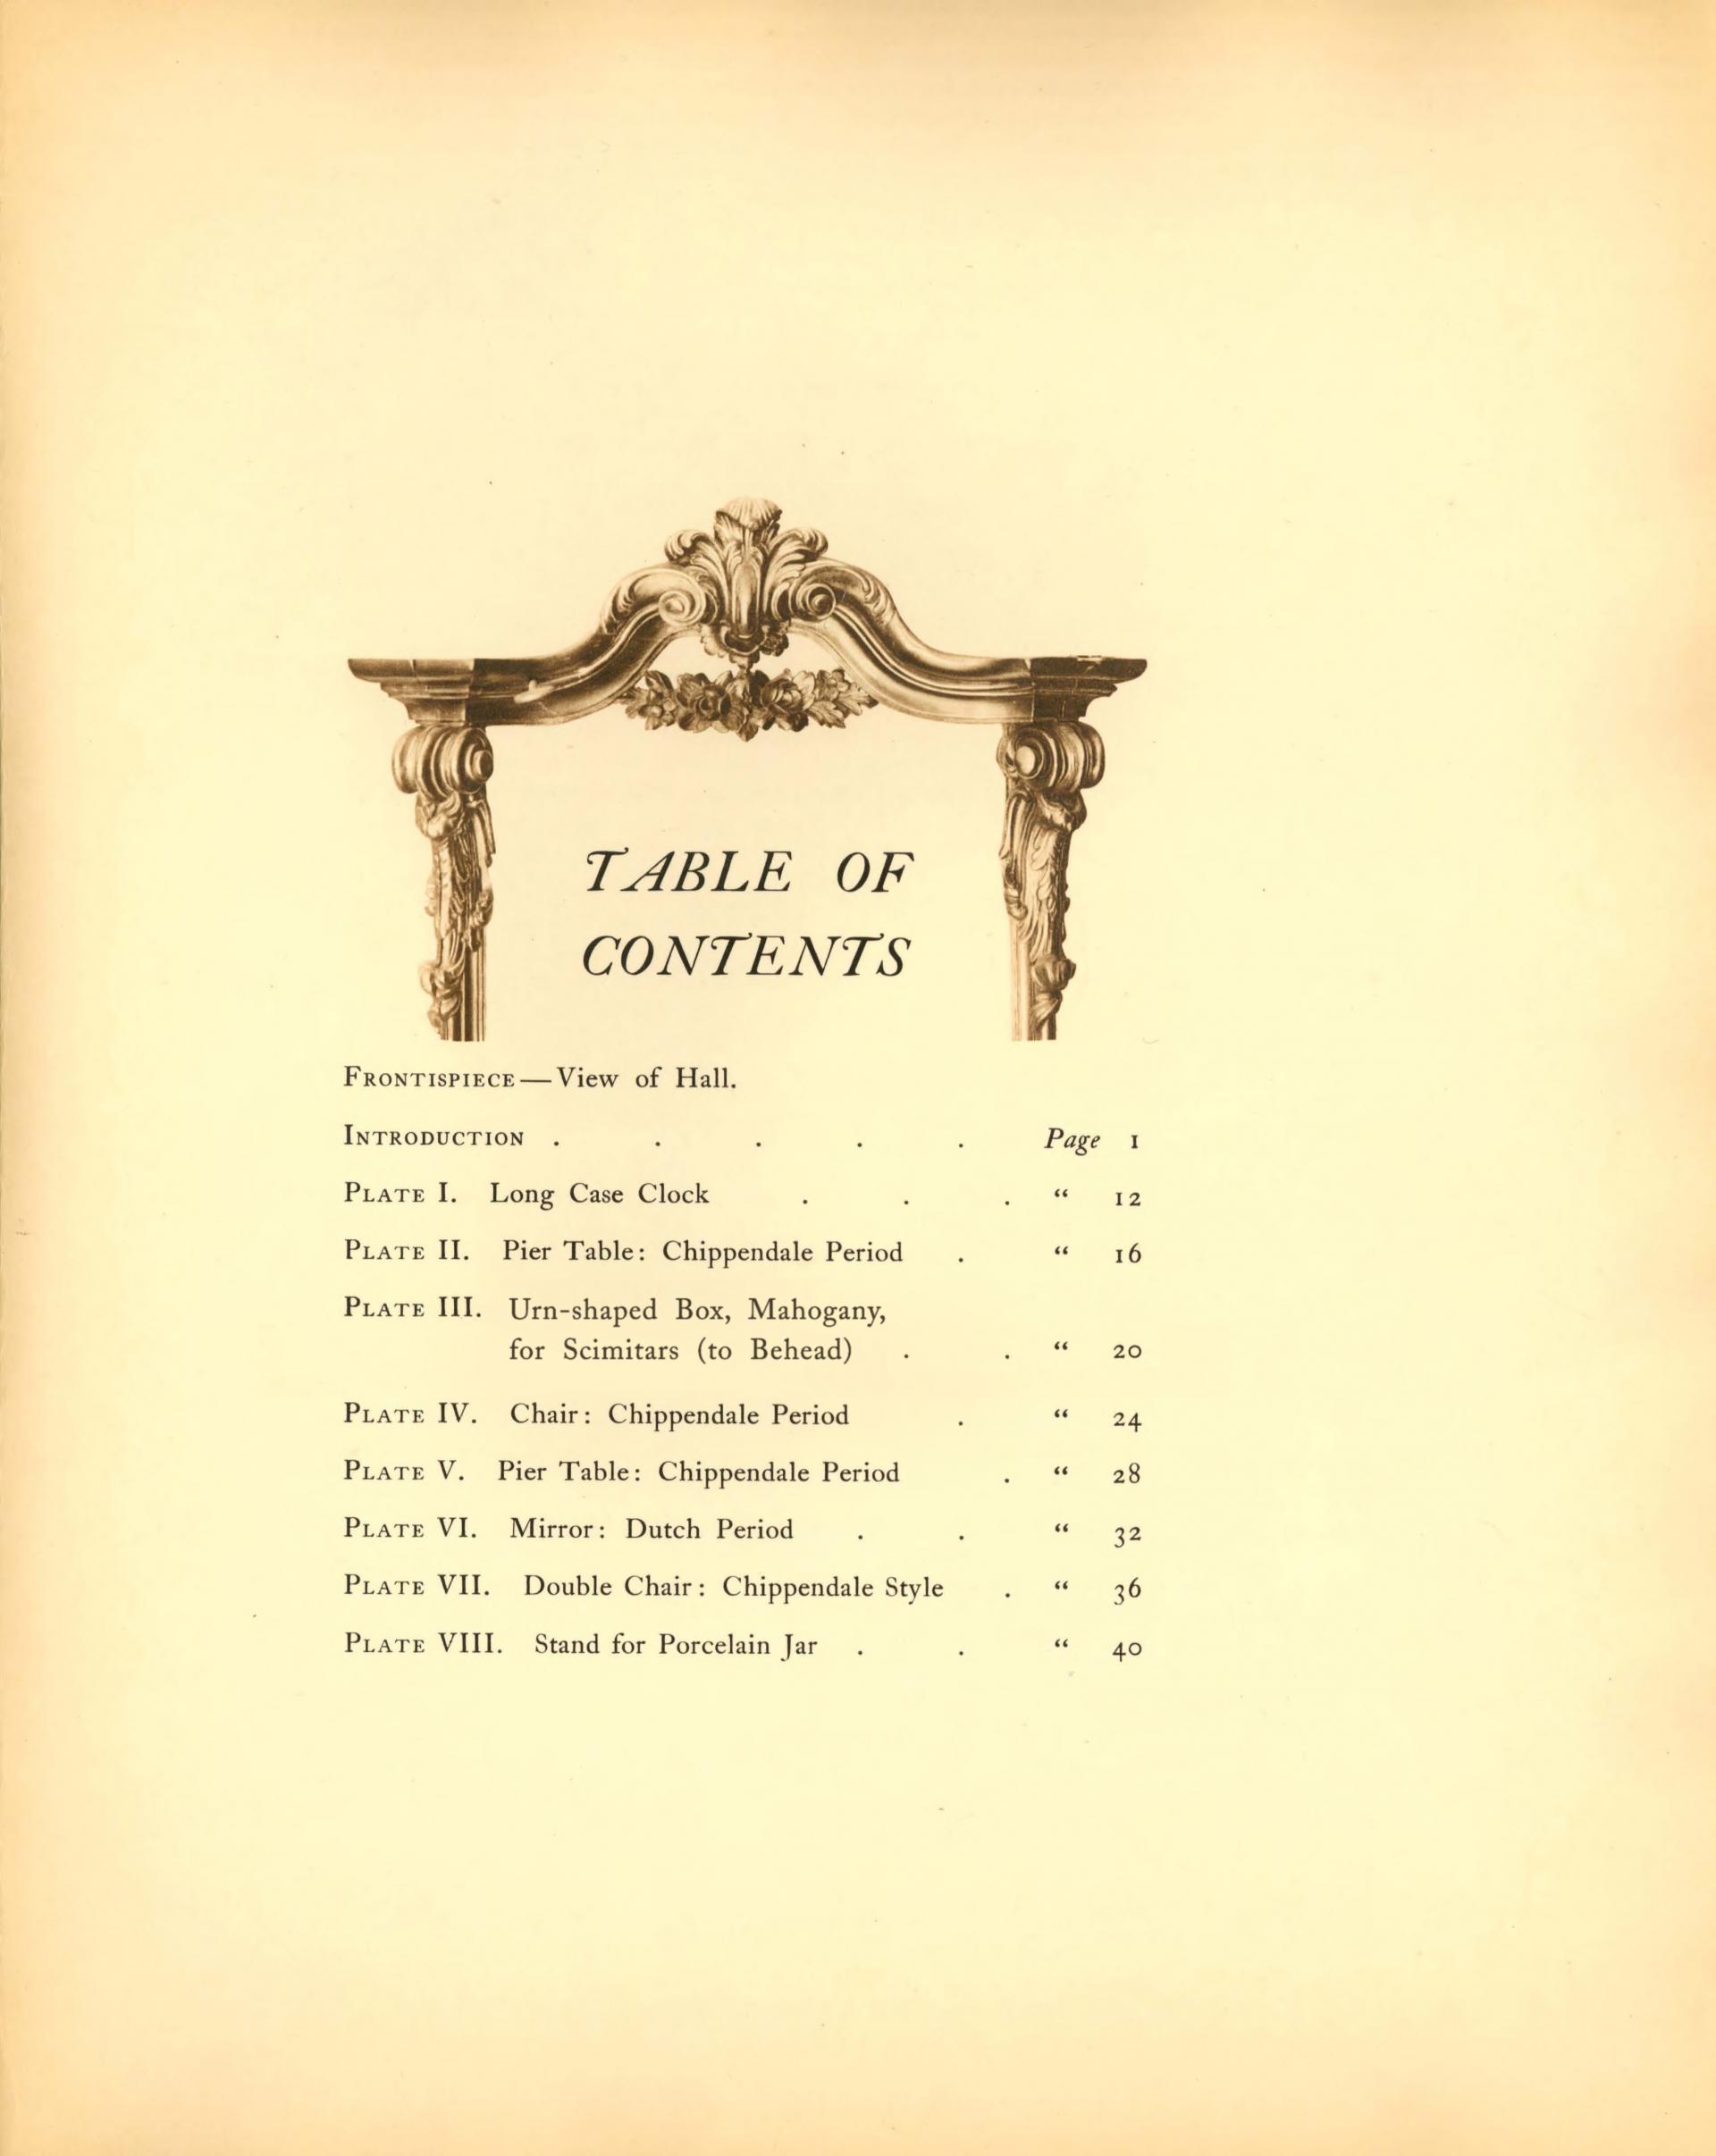 The Pendleton Collection: Table of Contents page, with an ornate photogravure frame around "table of contents" 